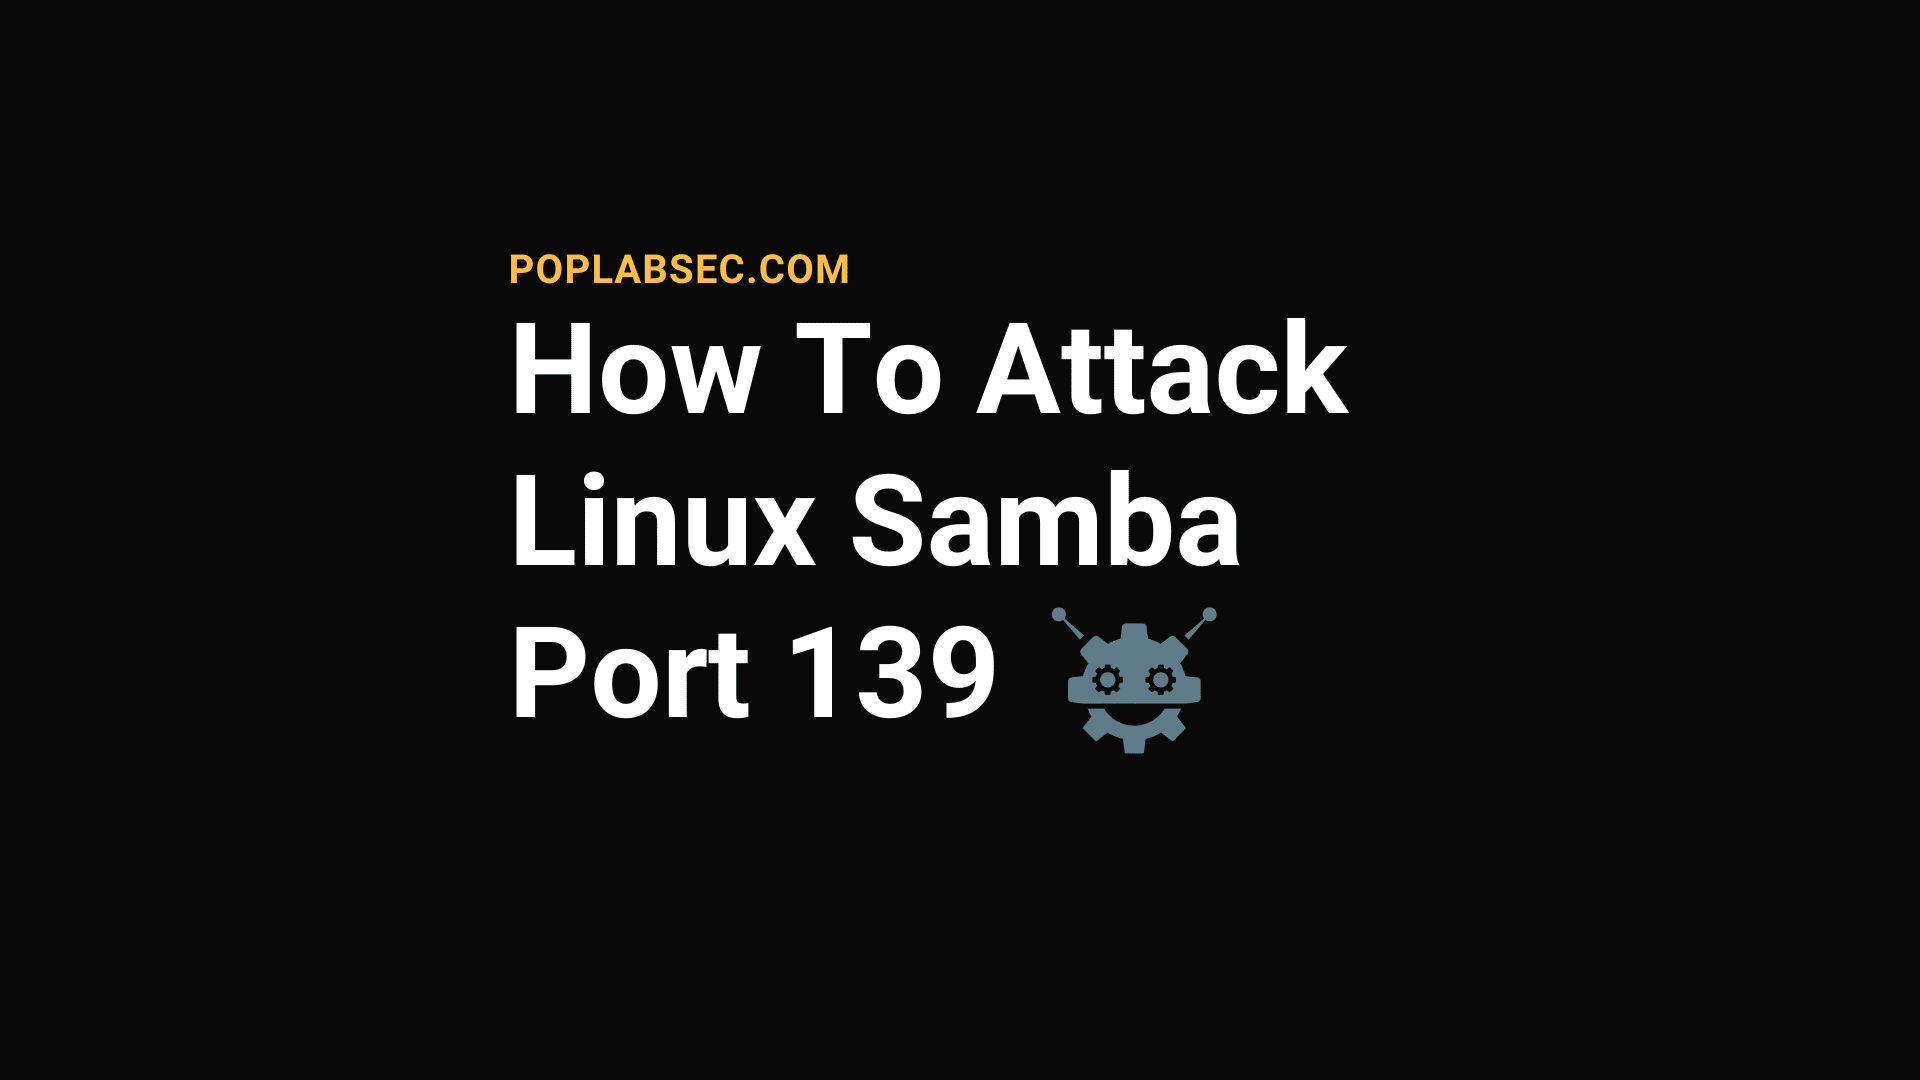 How To Attack Linux Samba Port 139 The Easy Way!